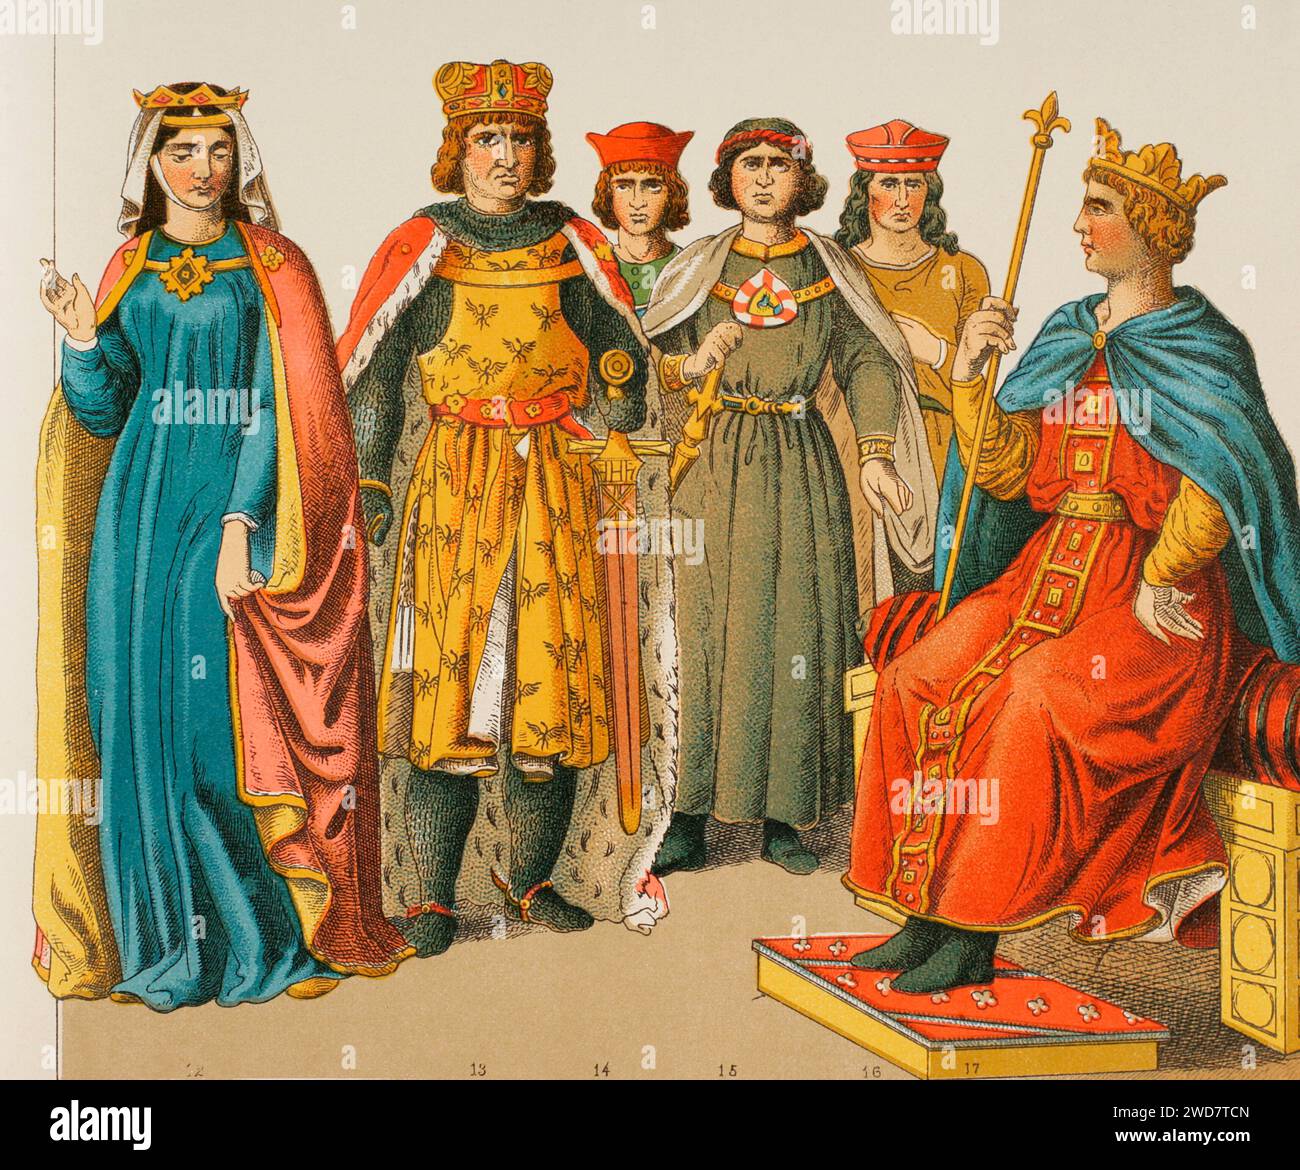 History of Germany. 1200. From left to right, 12: Anna of Hohenstaufen (1230-1307), daughter of Frederick II, 13: Archduke Henry of Breslau, ca. 1258-1290, 14-15-16: Counts, 17: Frederick II, Holy Roman Emperor (1194-1250). Chromolithography. 'Historia Universal', by César Cantú. Volume X, 1881. Stock Photo